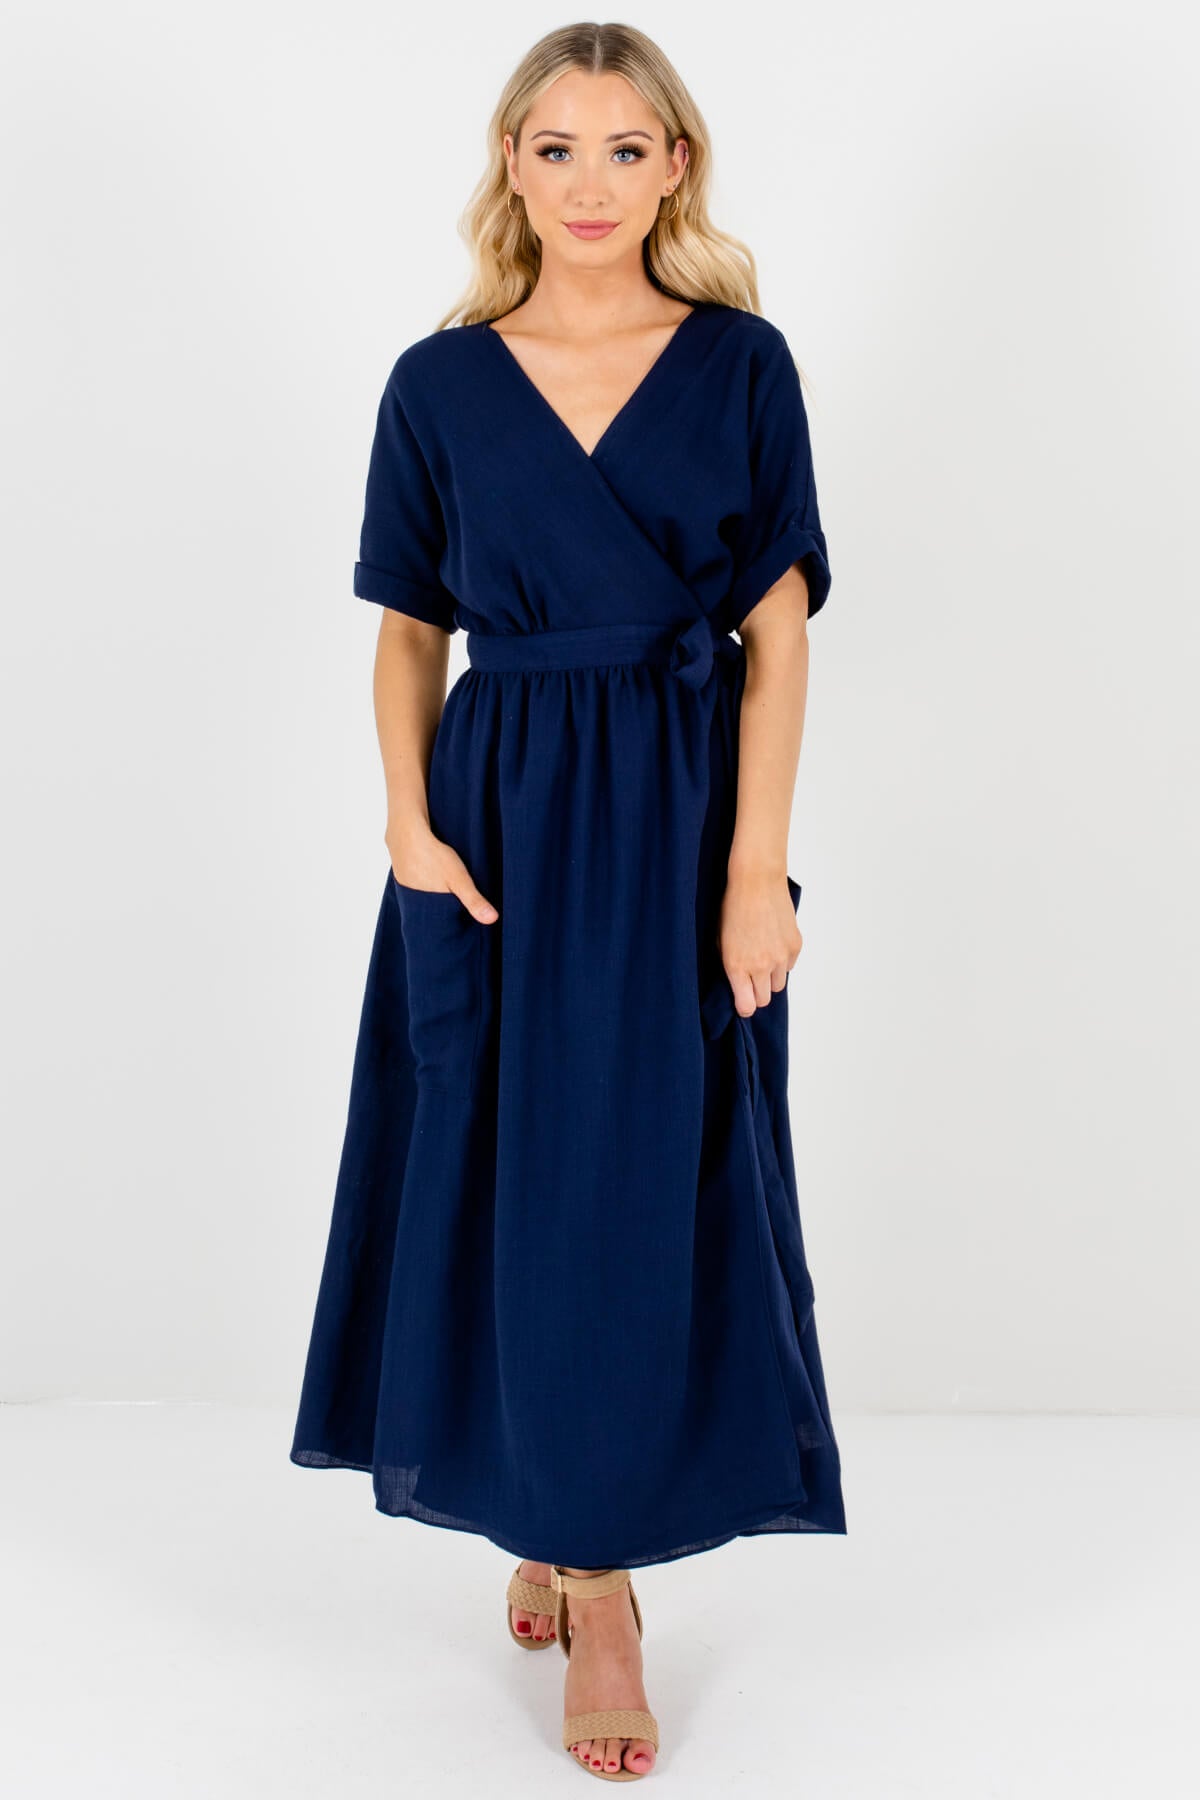 Navy Blue Wrap Maxi Dresses with Pockets Affordable Online Boutique